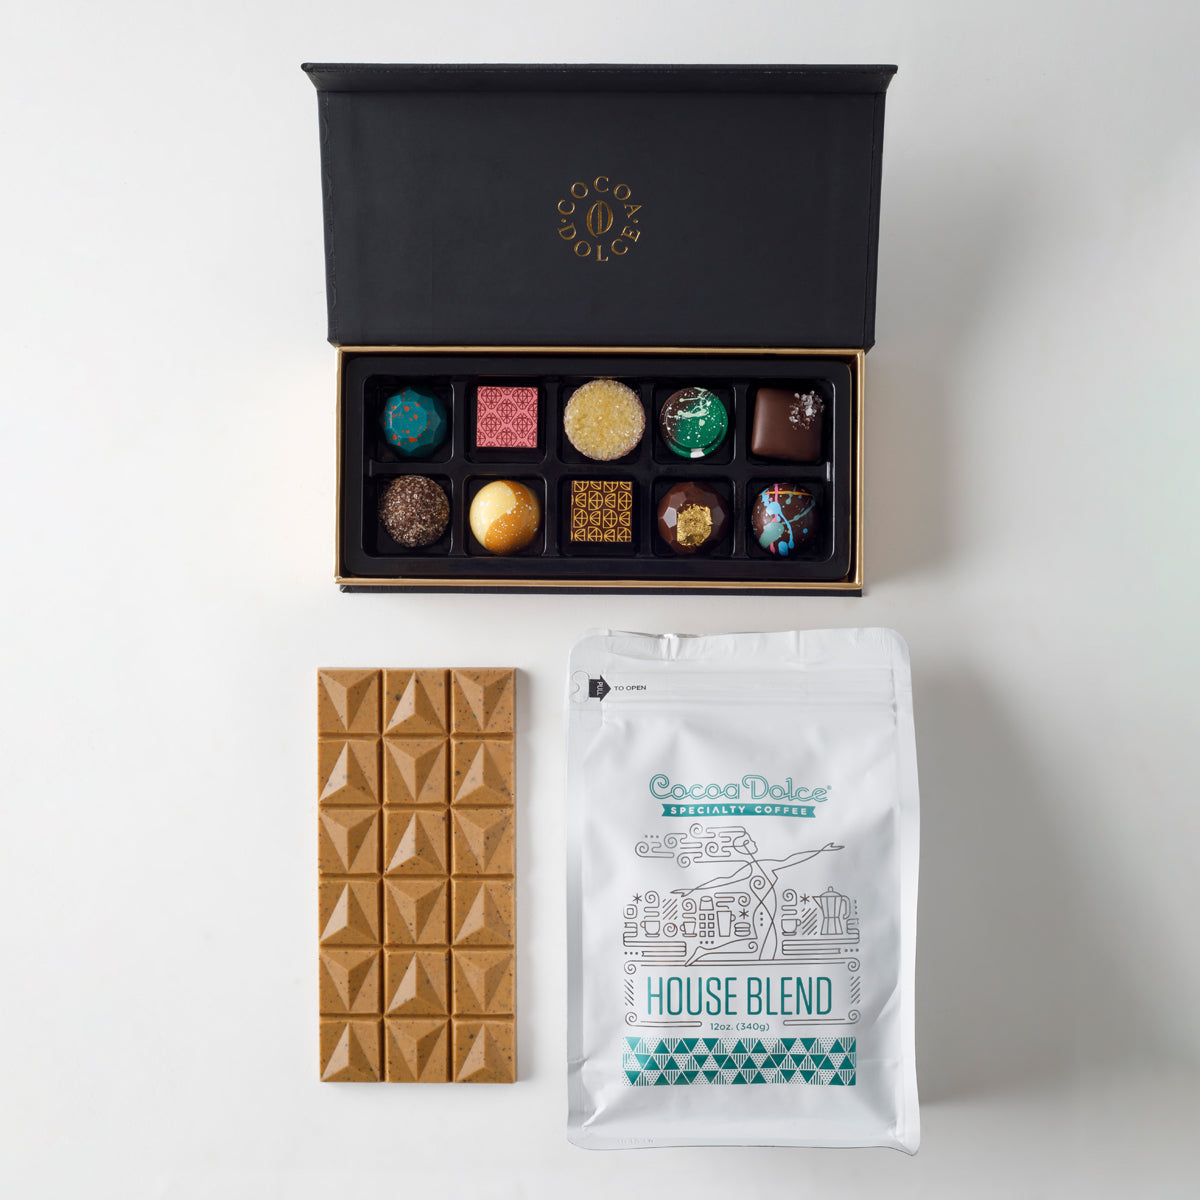 Hot Chocolate Gift Set - Cocoa Dolce Chocolates